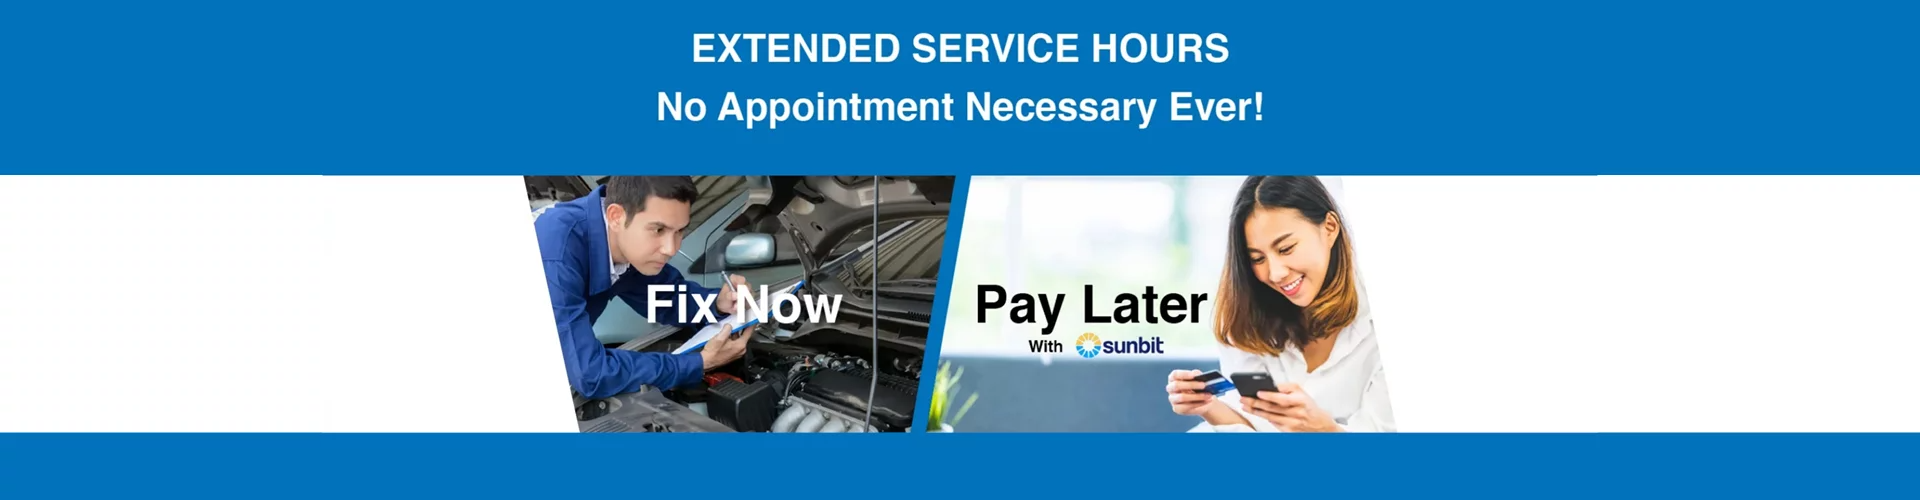 Extended service hours at Honda of New Rochelle